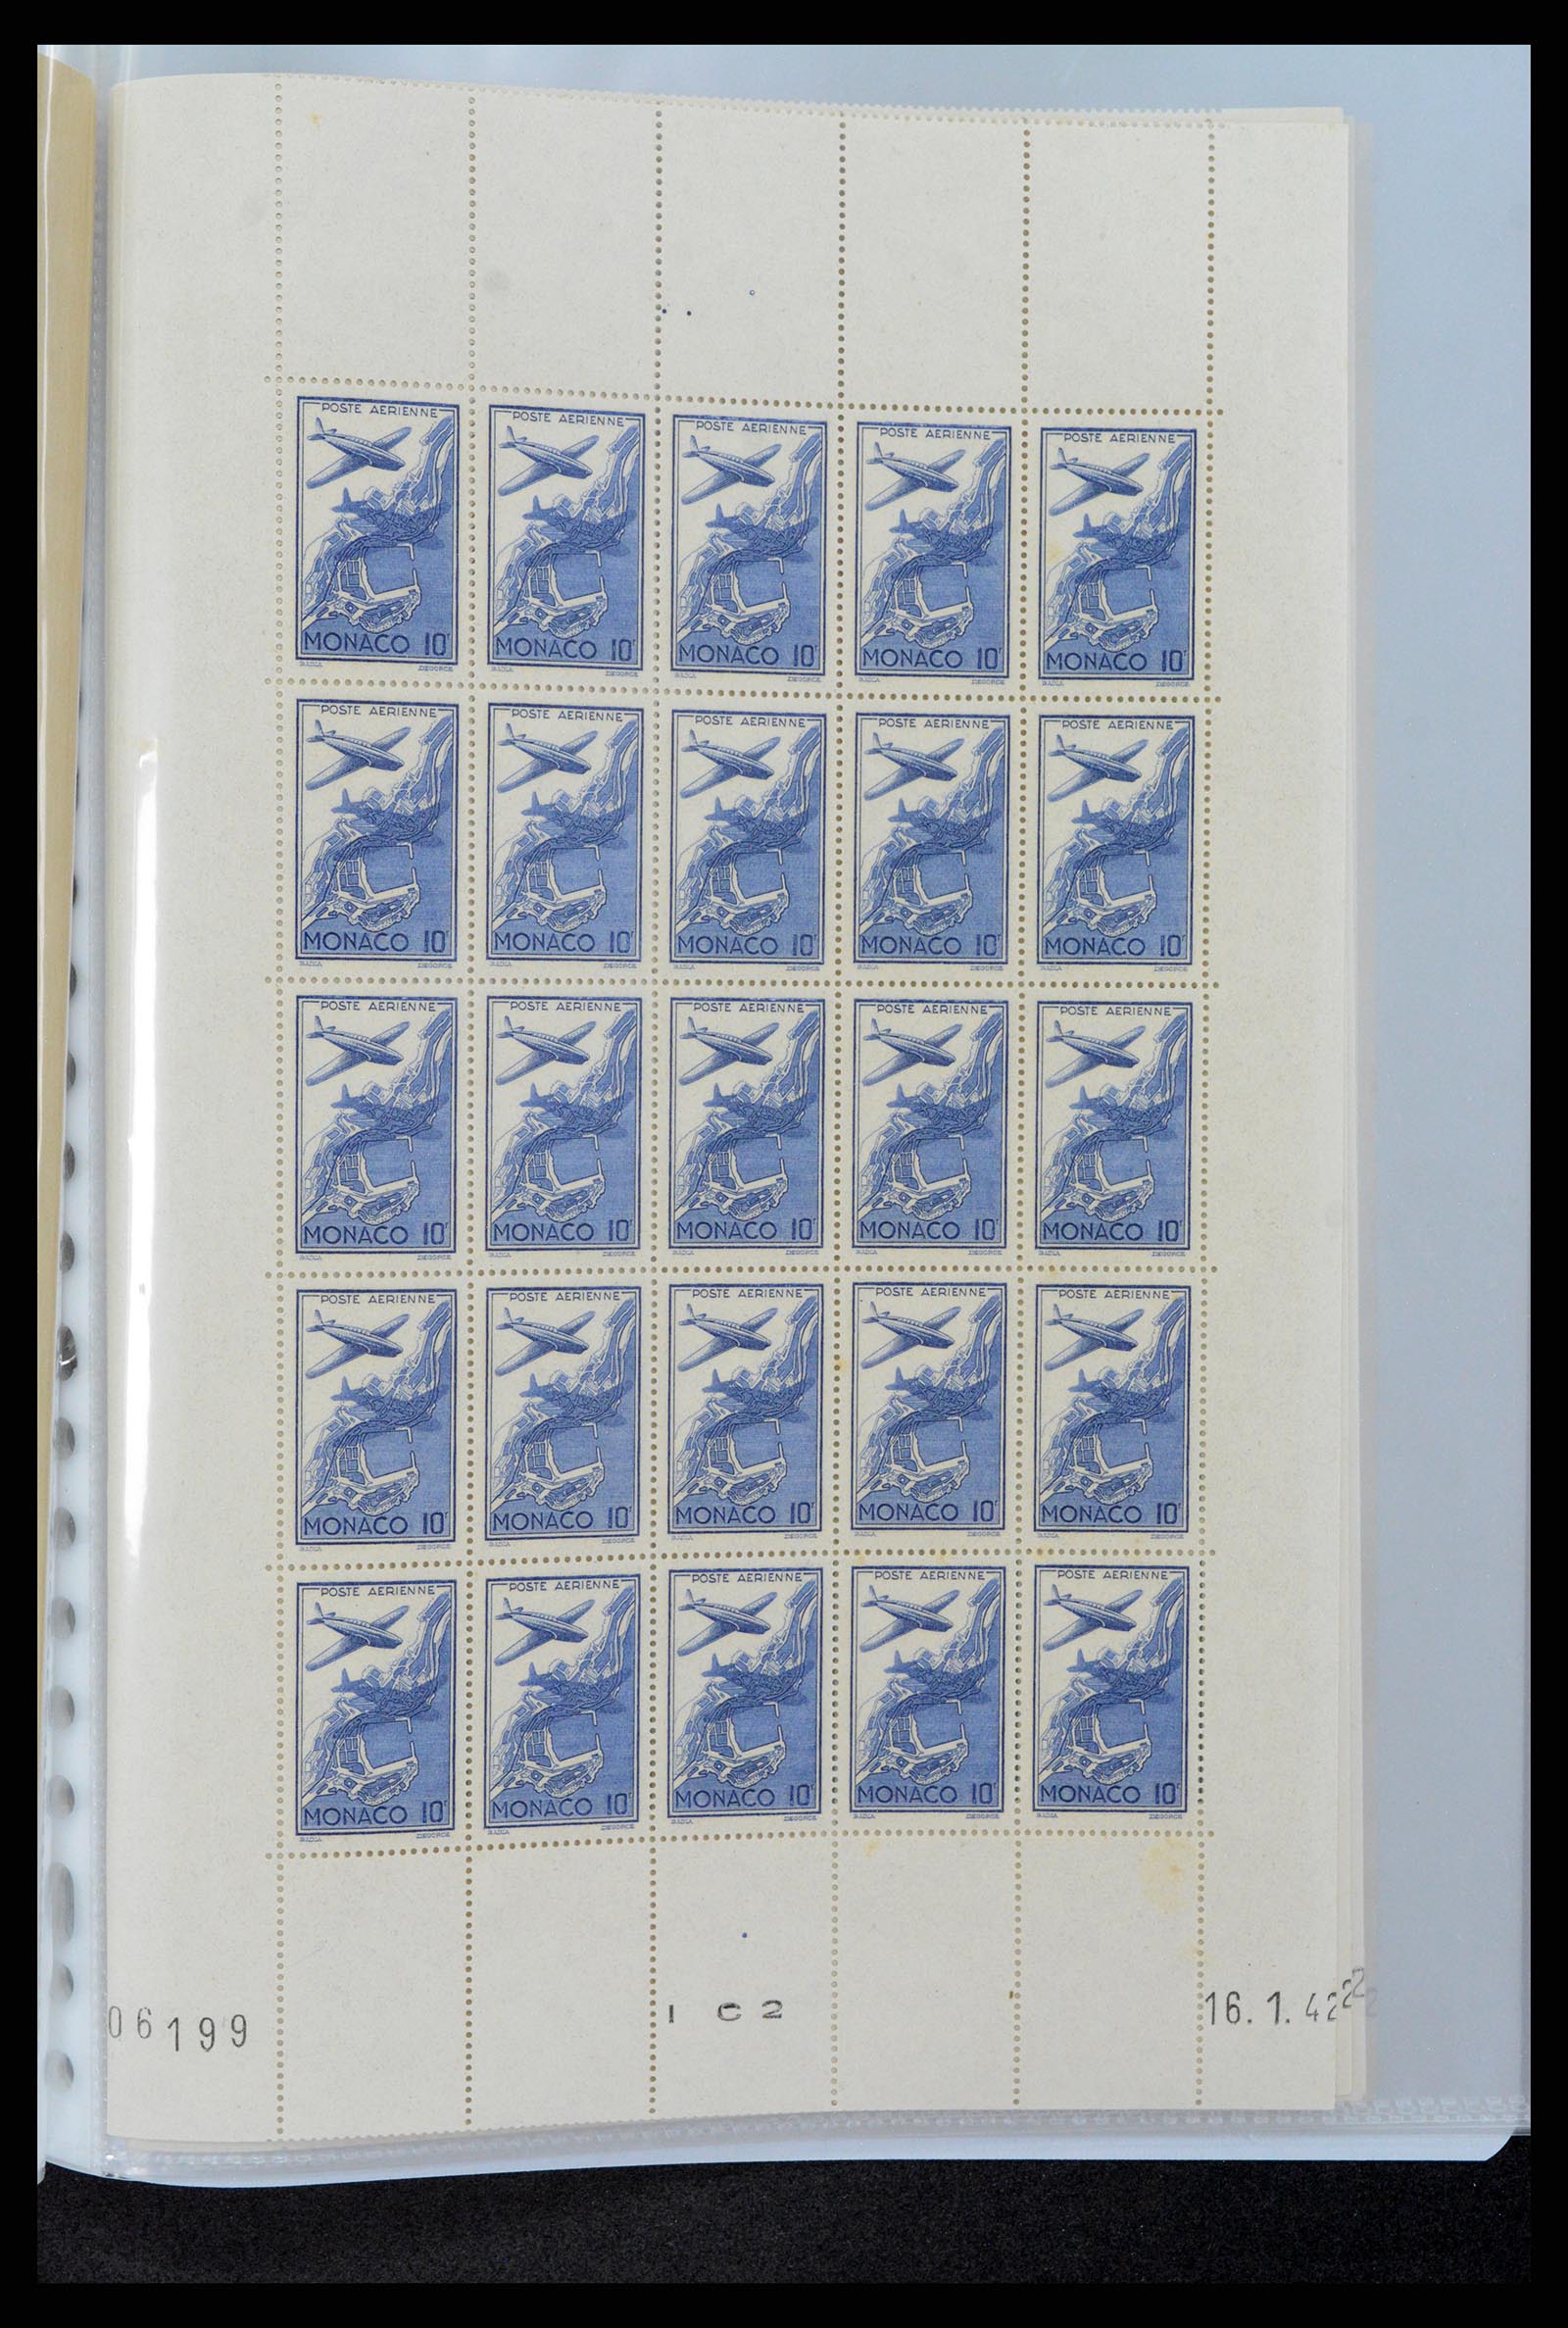 37984 054 - Stamp collection 37984 Monaco better issues 1942-1982.